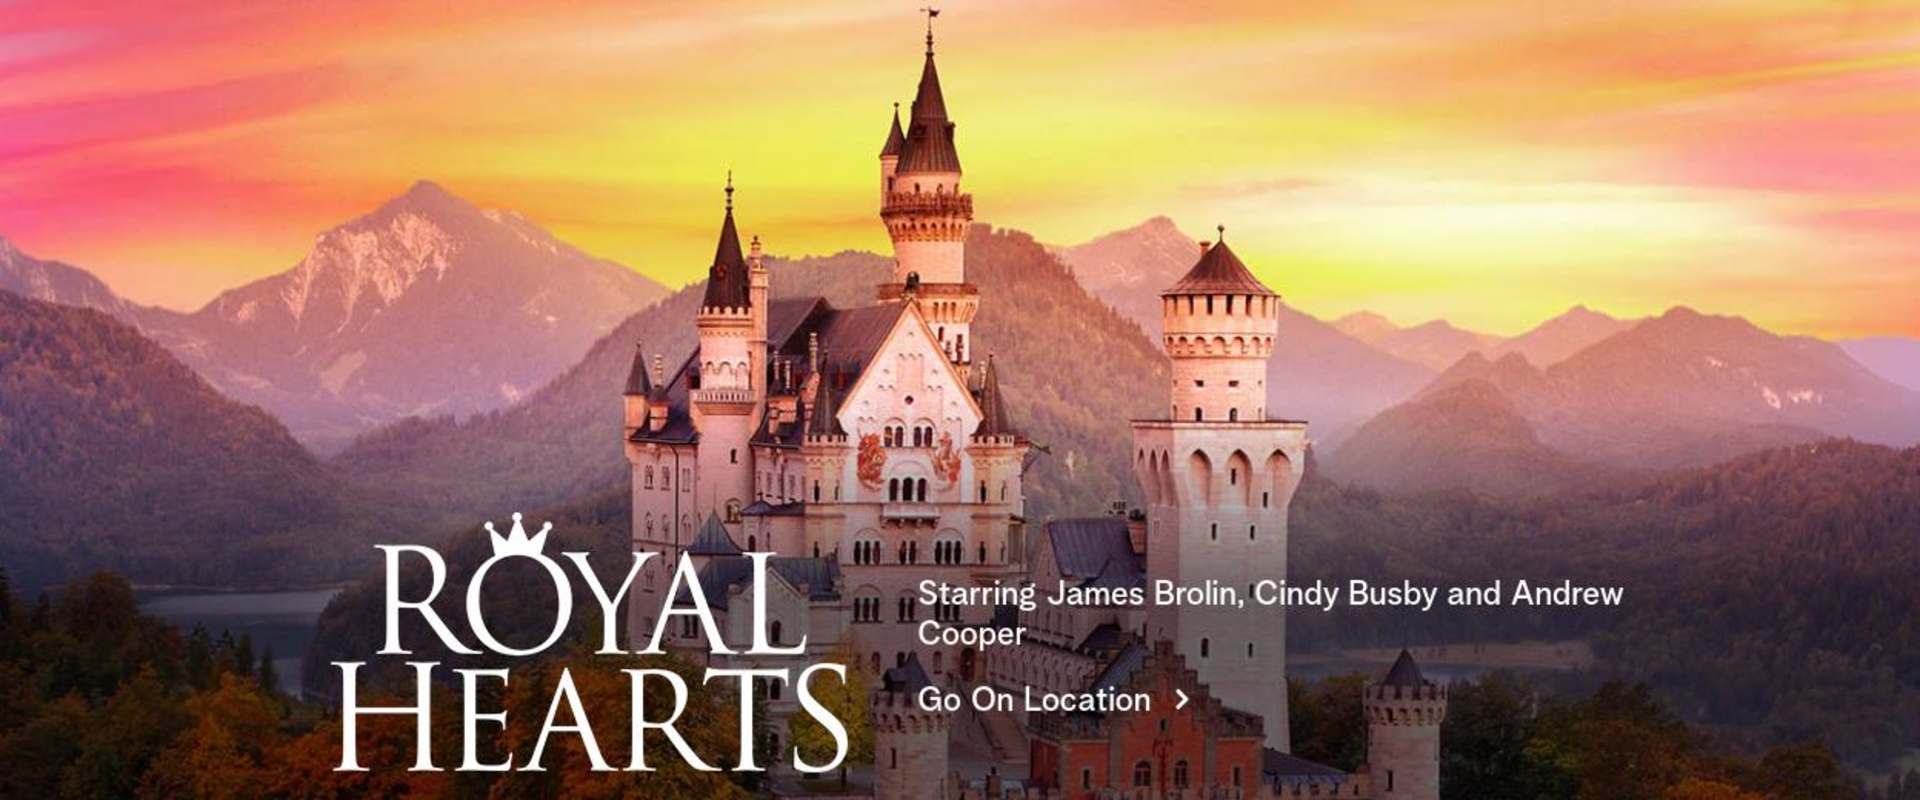 Royal Hearts background 1